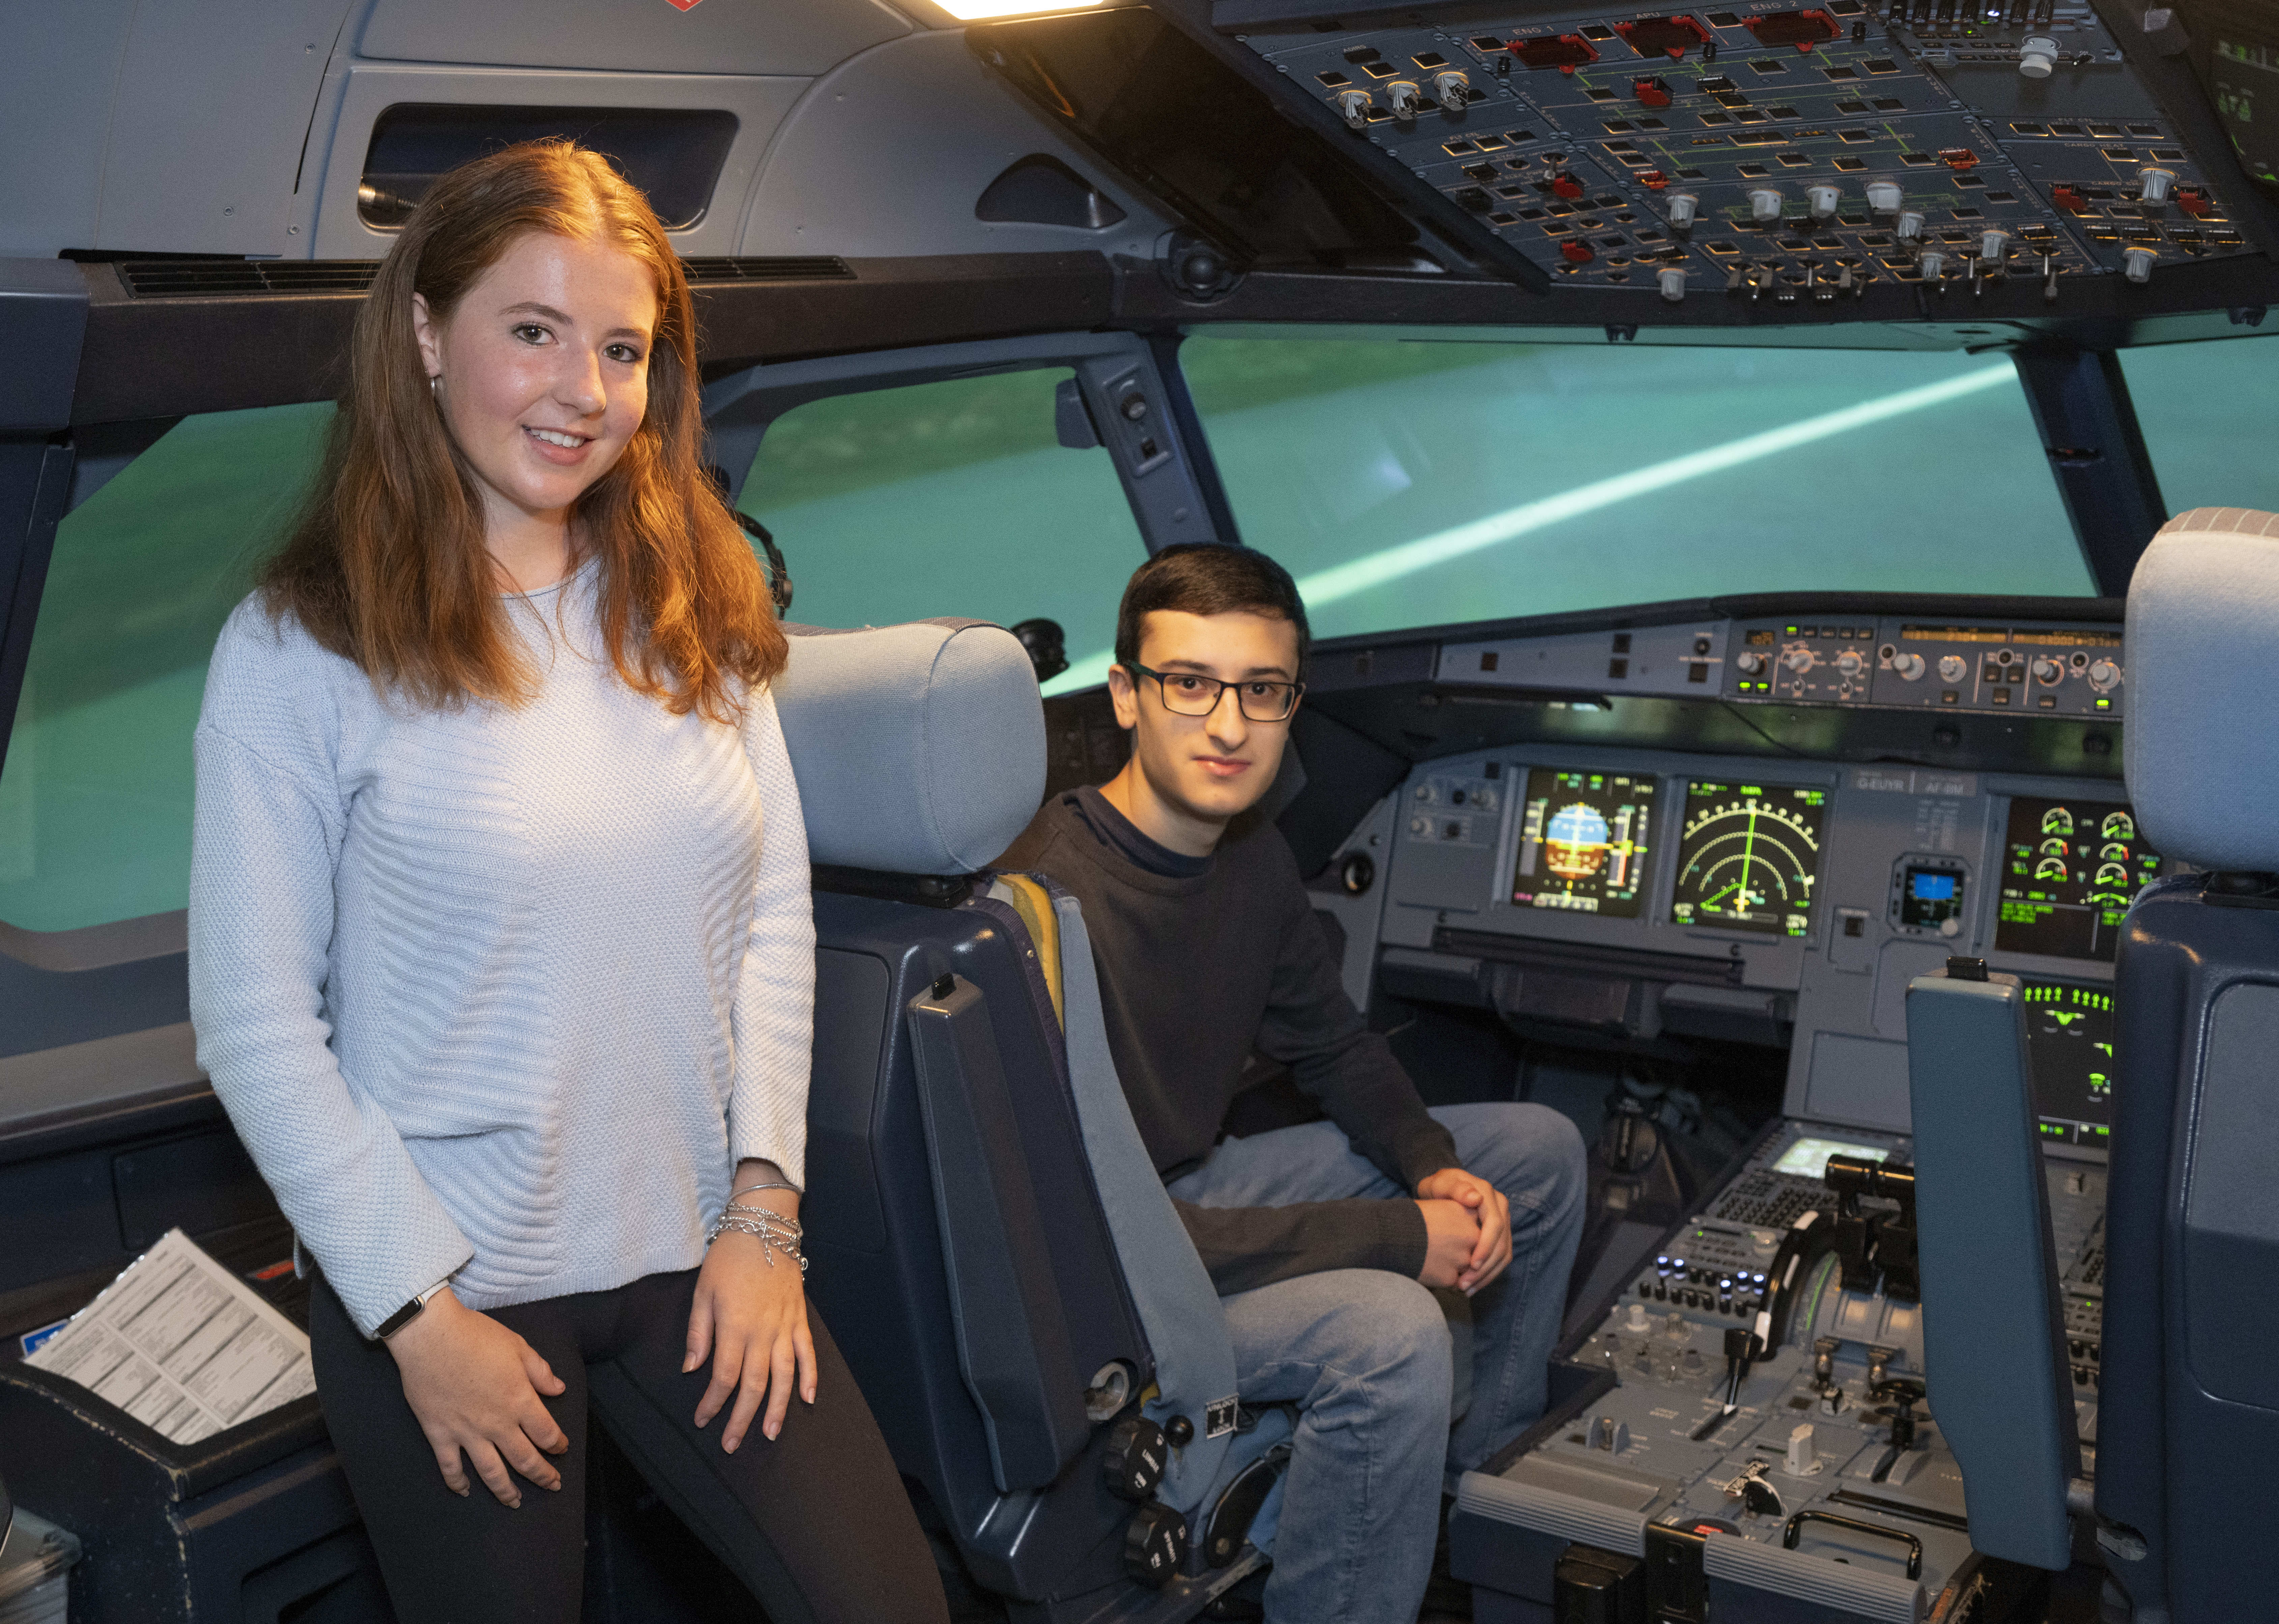 BA work experience students Holly and Priyesh dream of a flying career